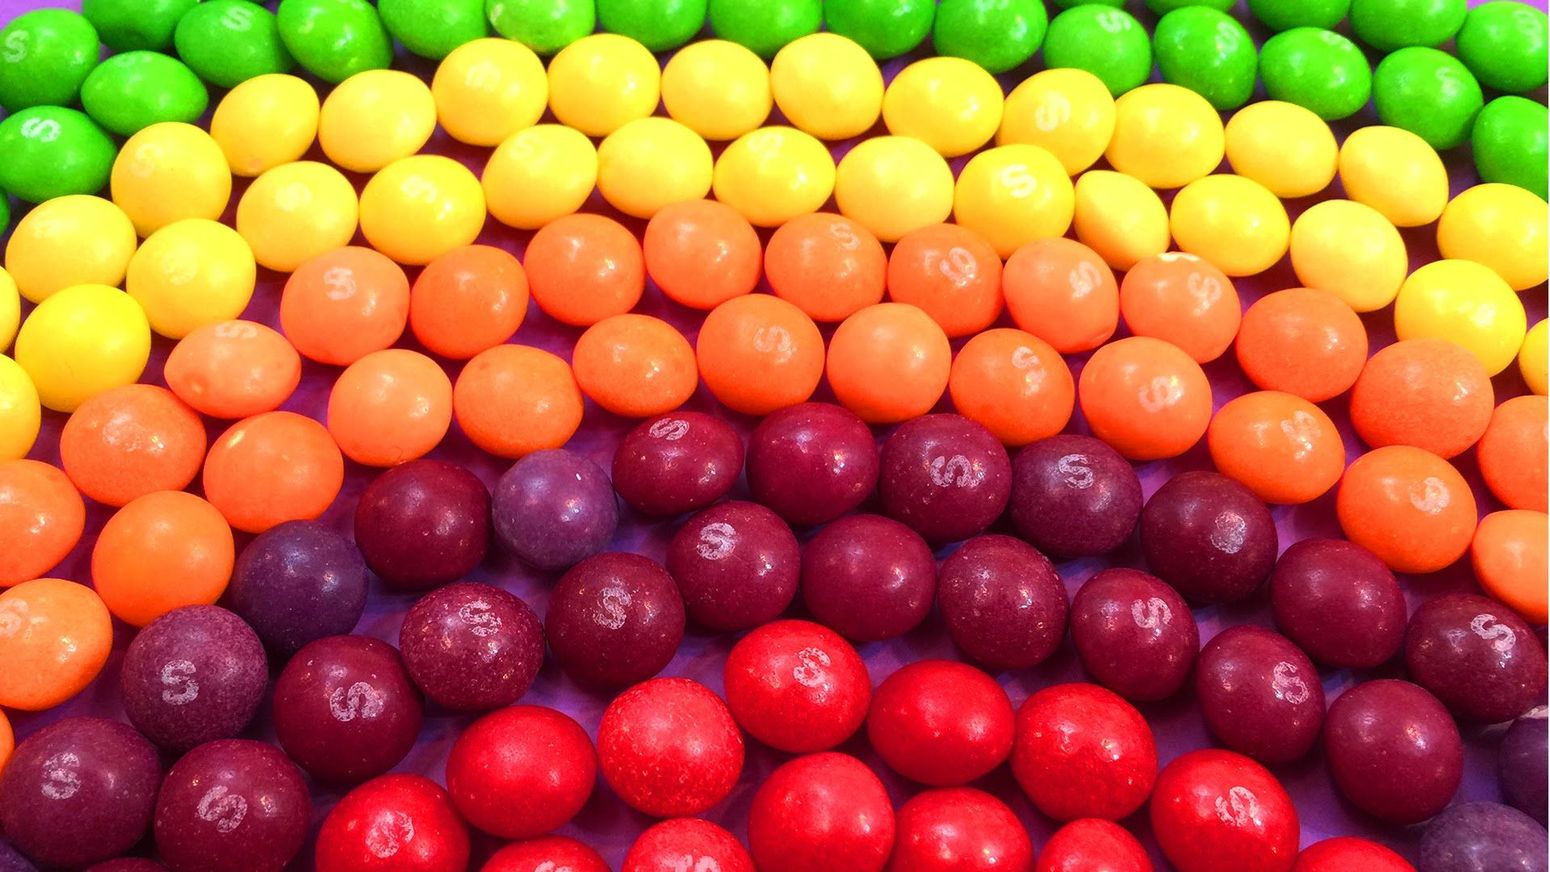 are skittles all the same flavor